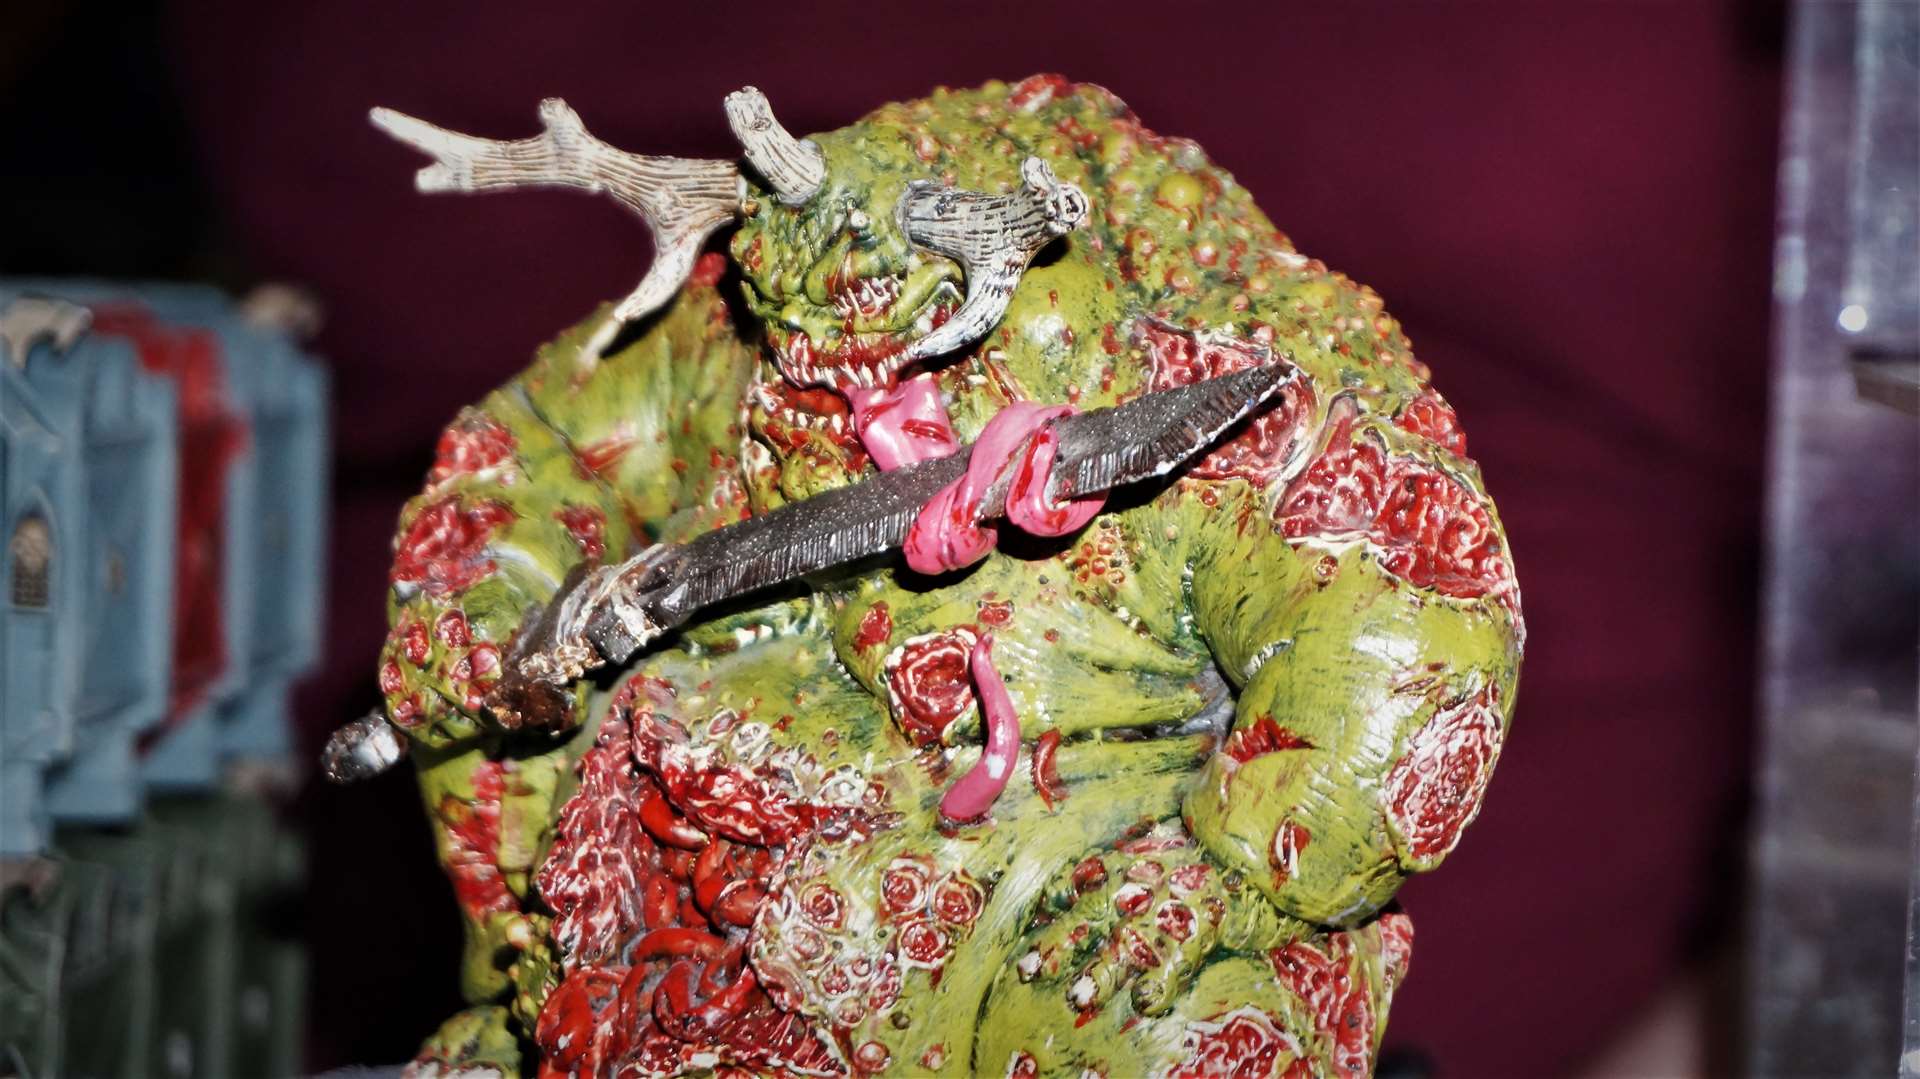 It takes all types to make up a model show and in a display of cultural diversity the club invited this creature along. Sean Norquay came over from Orkney with his father, Laurence, and this scary monster – a greater demon of Nurgle.